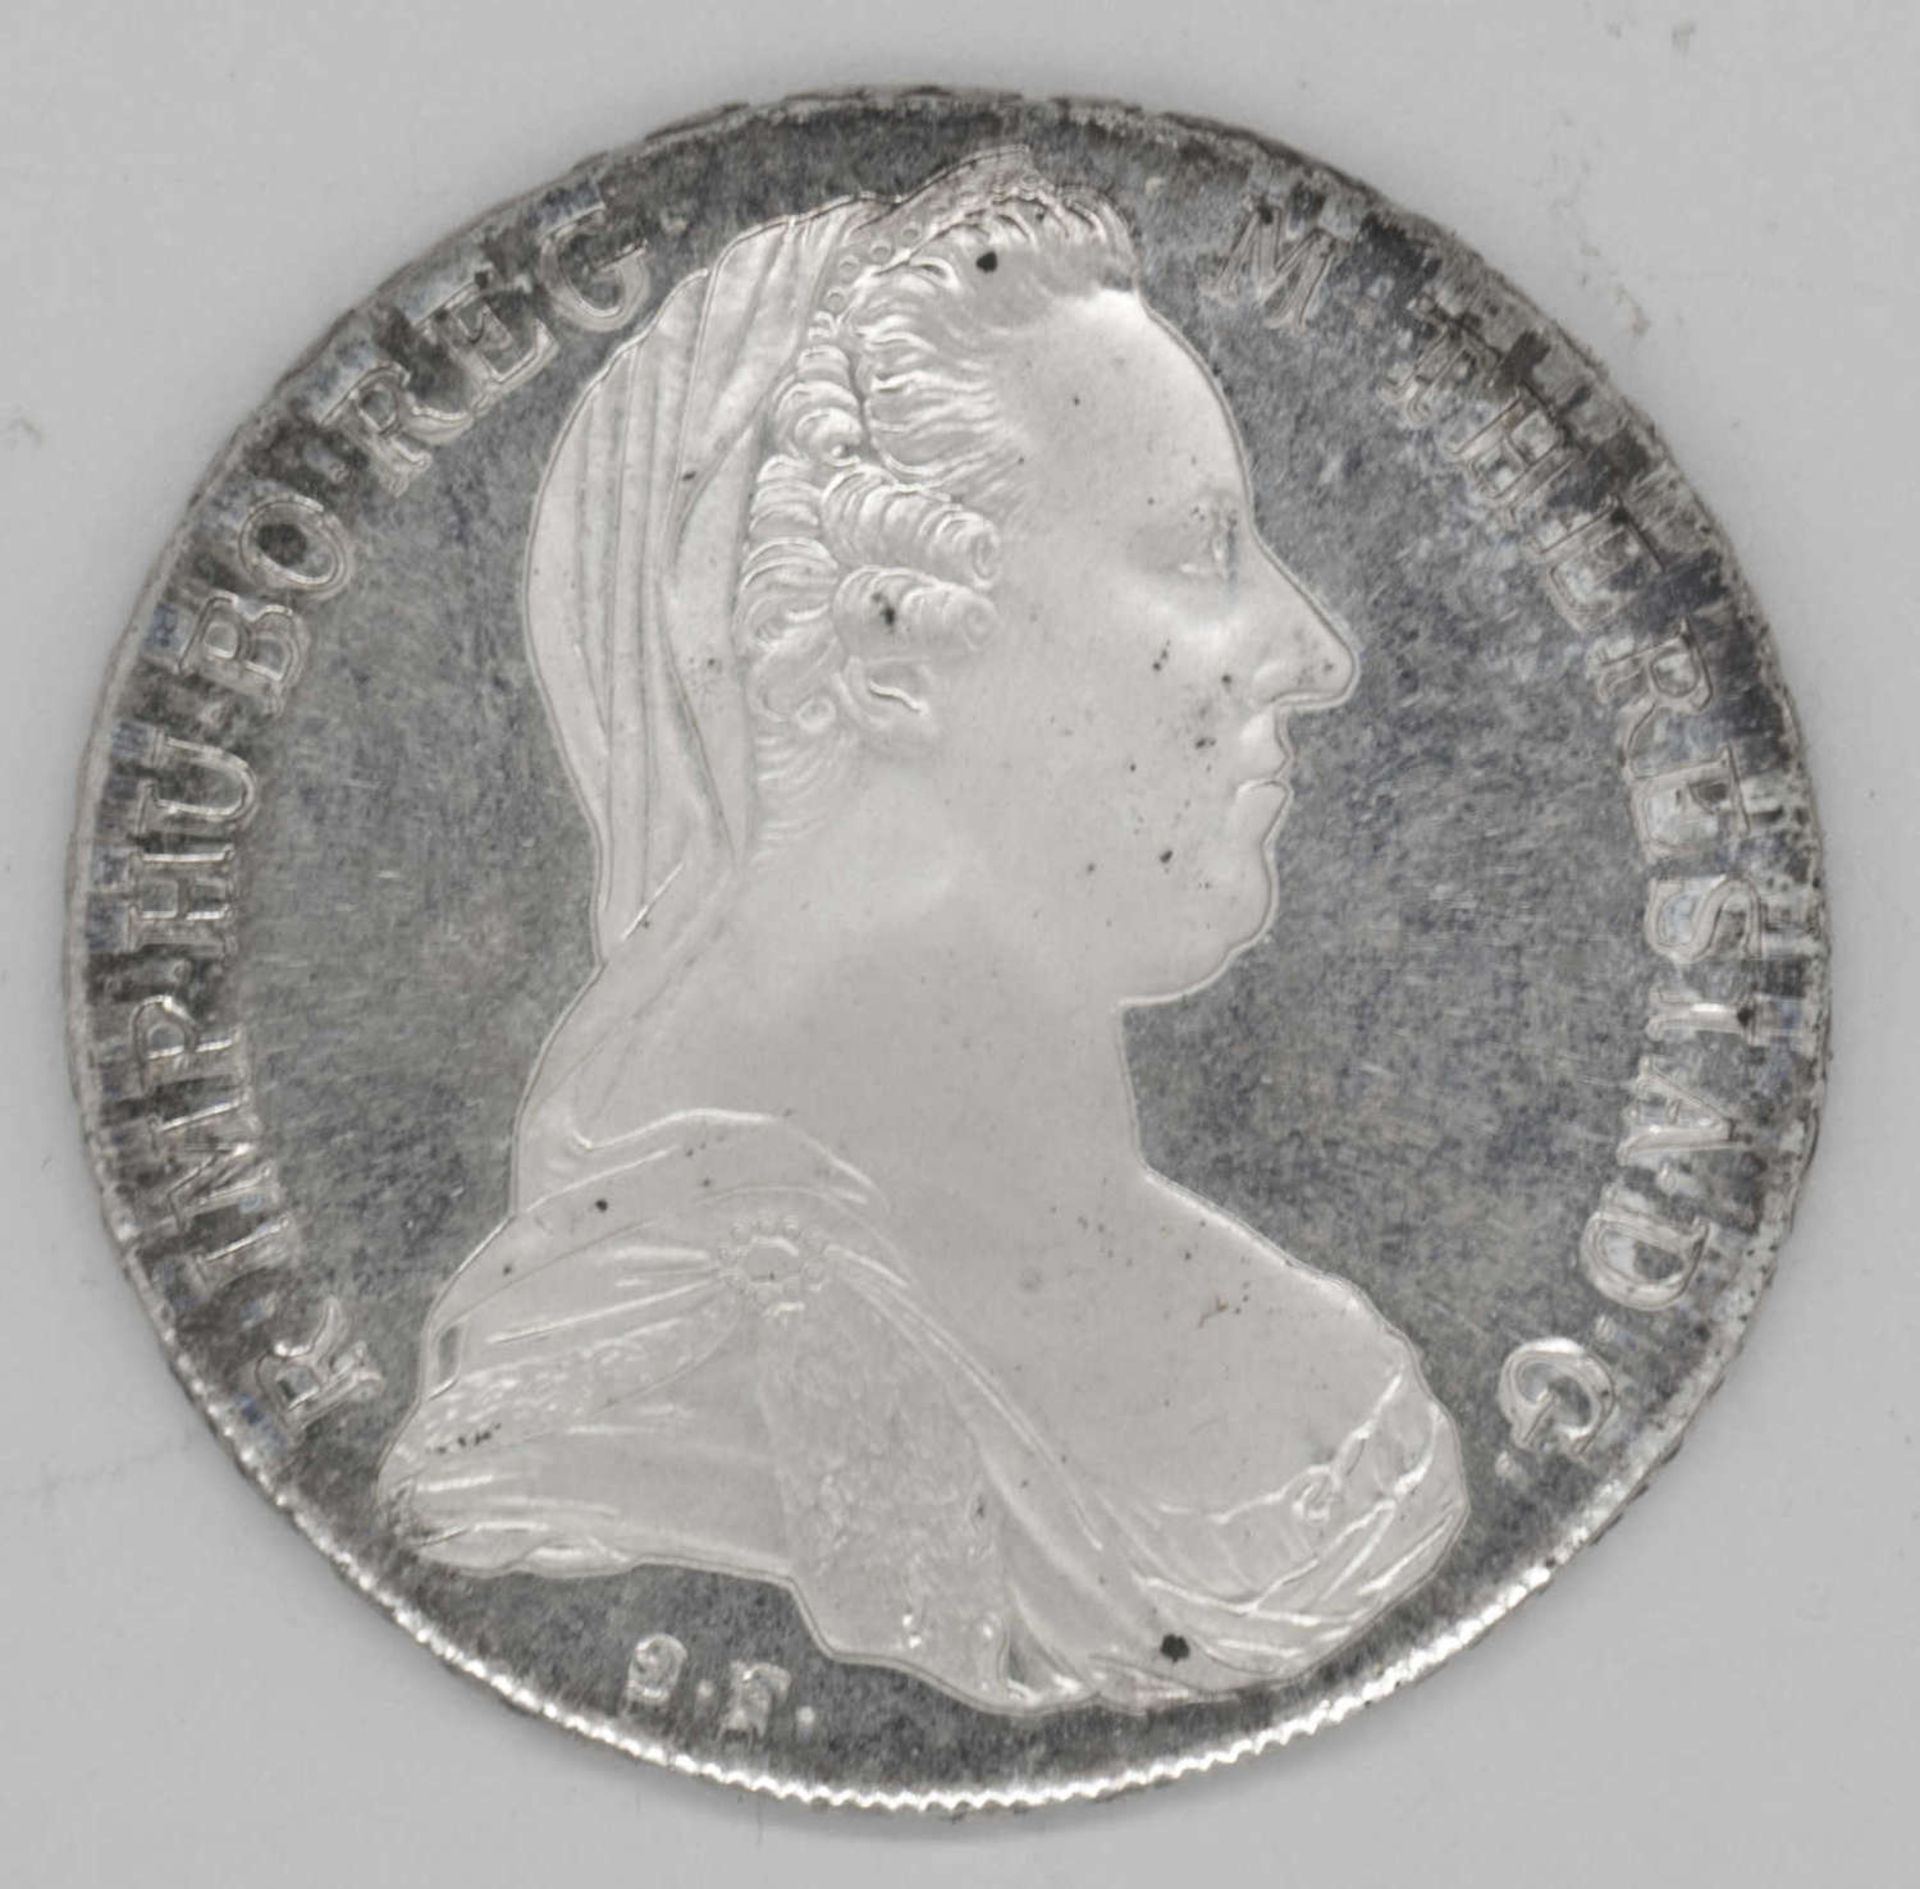 Conventional thaler Maria Theresia (Maria Theresien Taler). Silver 833.